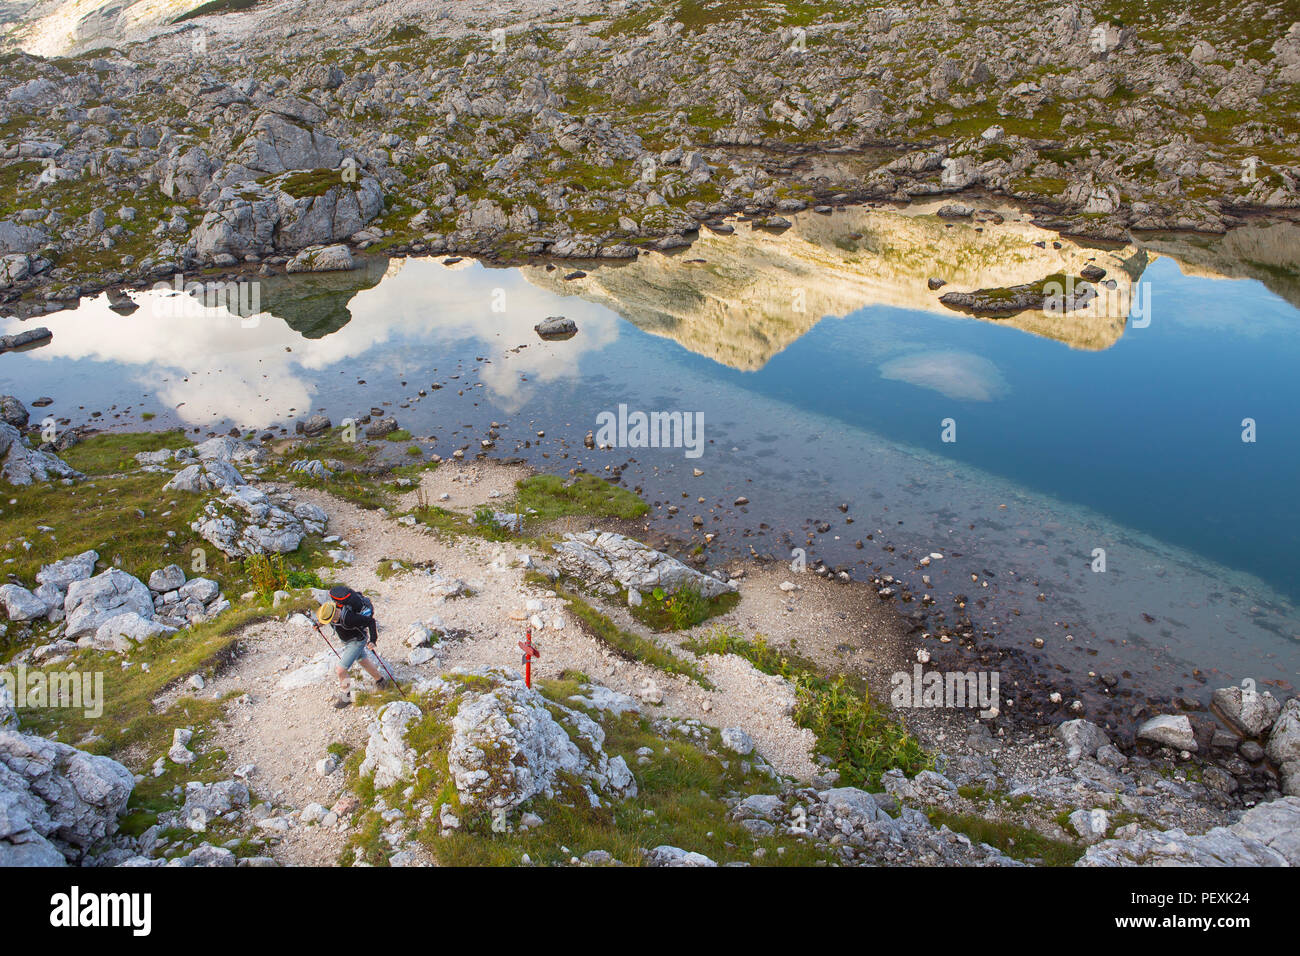 Hiker in Valley of the Seven lakes, Triglav National Park, Slovenia Stock Photo